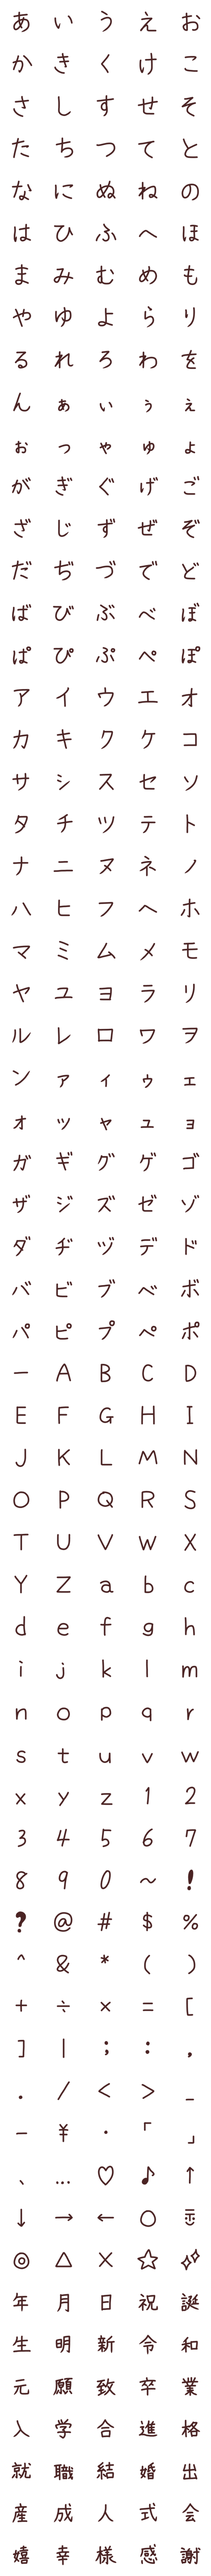 [LINE絵文字]美文字を目指した305文字の画像一覧